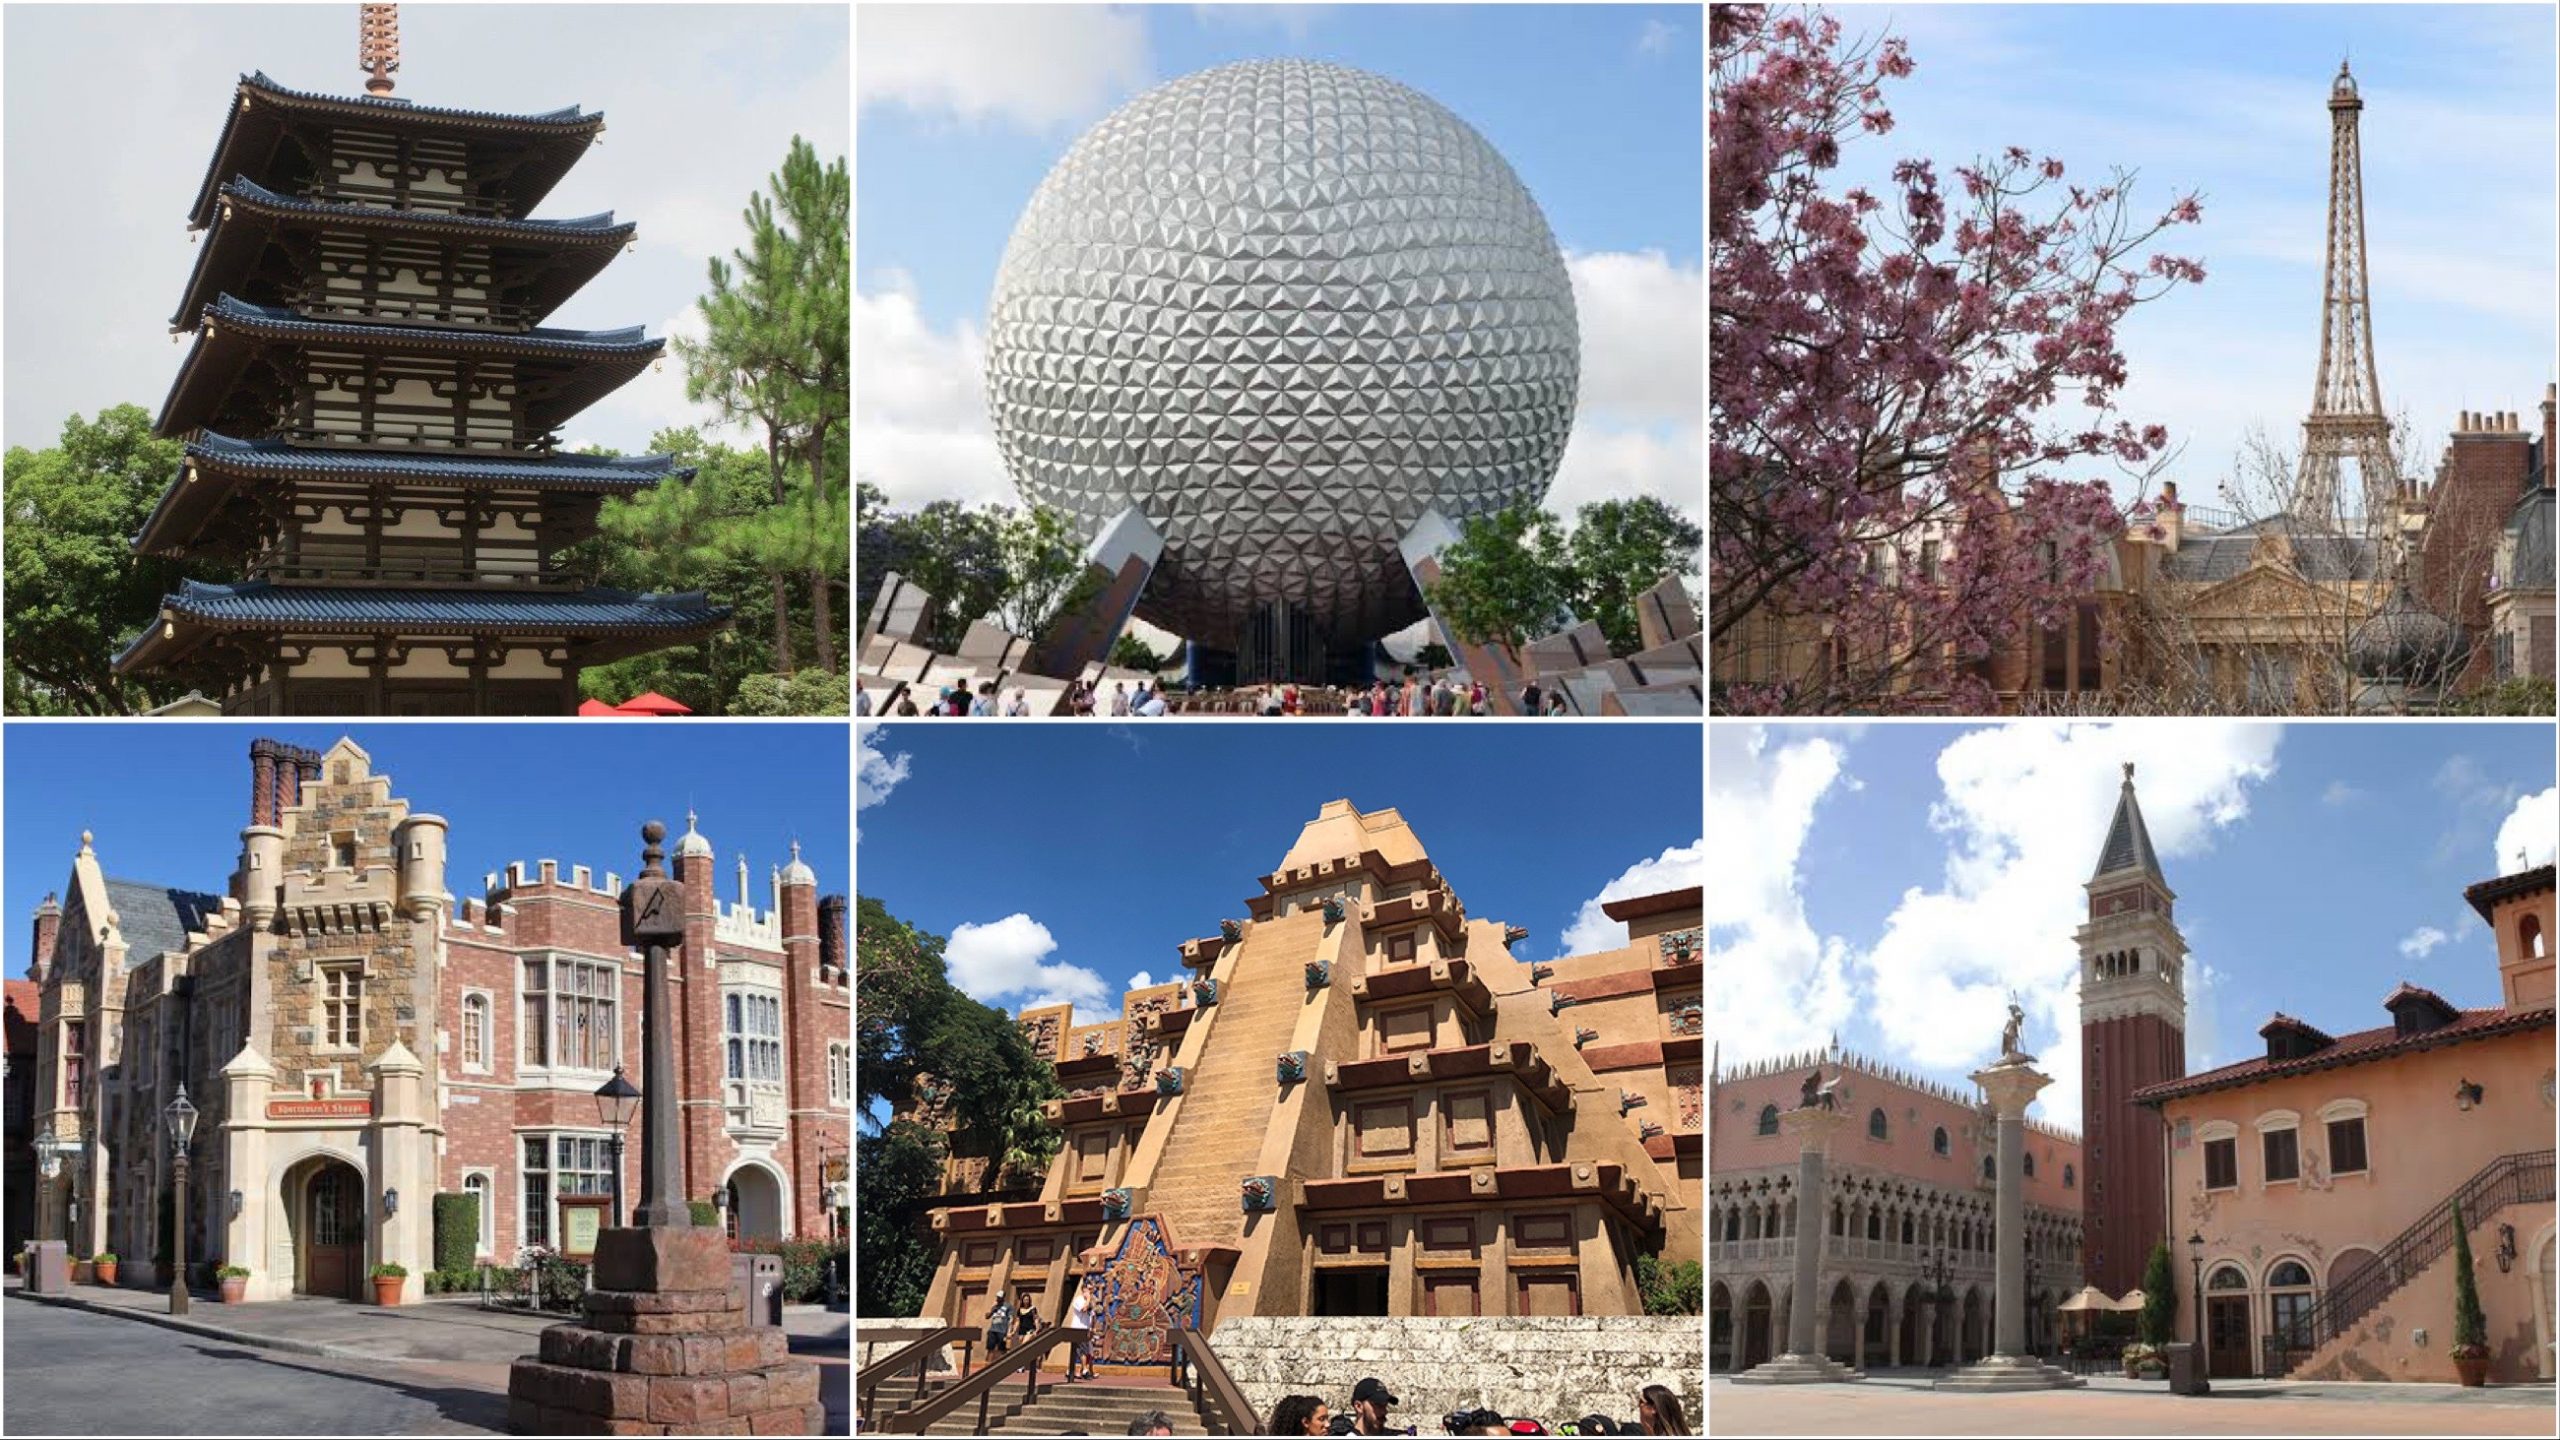 Take A Trip Around The World At Epcot!